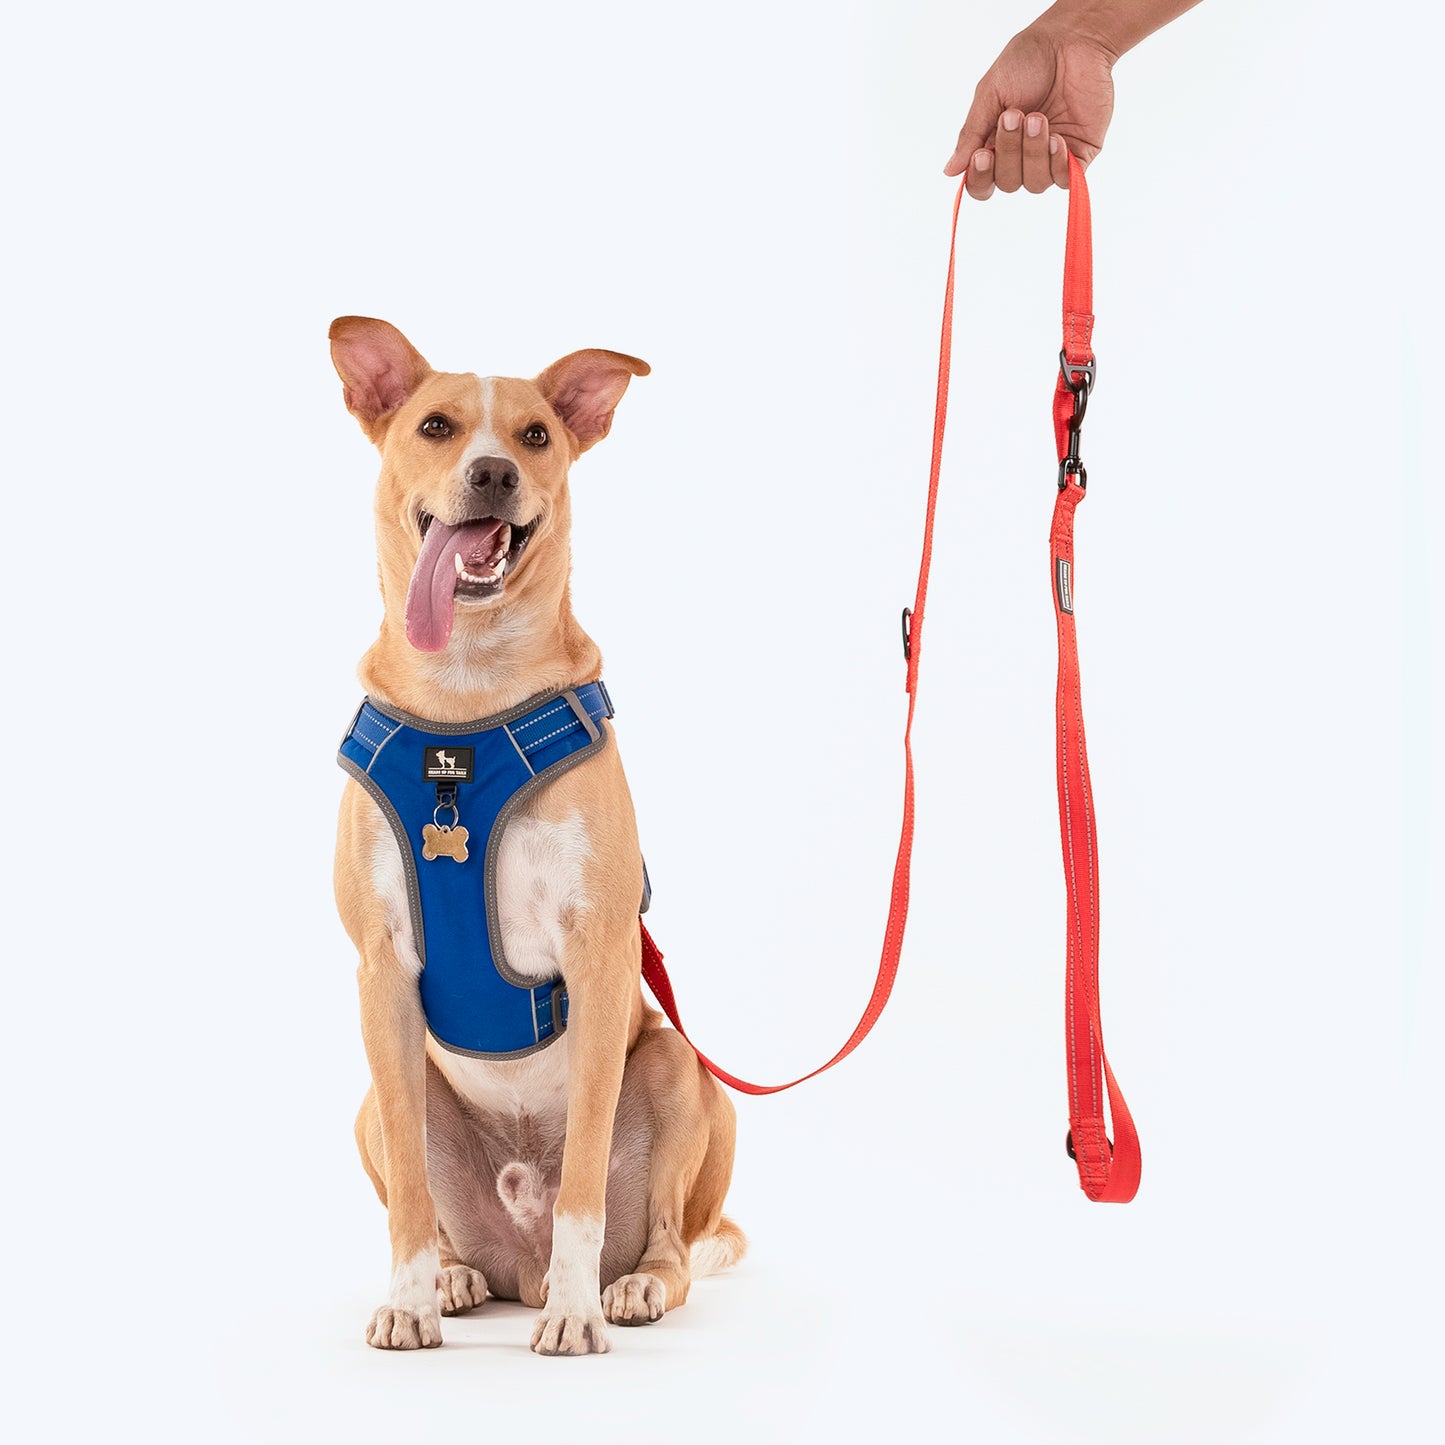 HUFT Reflective Multi-purpose Leash For Dog - Red (2.5 meters) - Heads Up For Tails